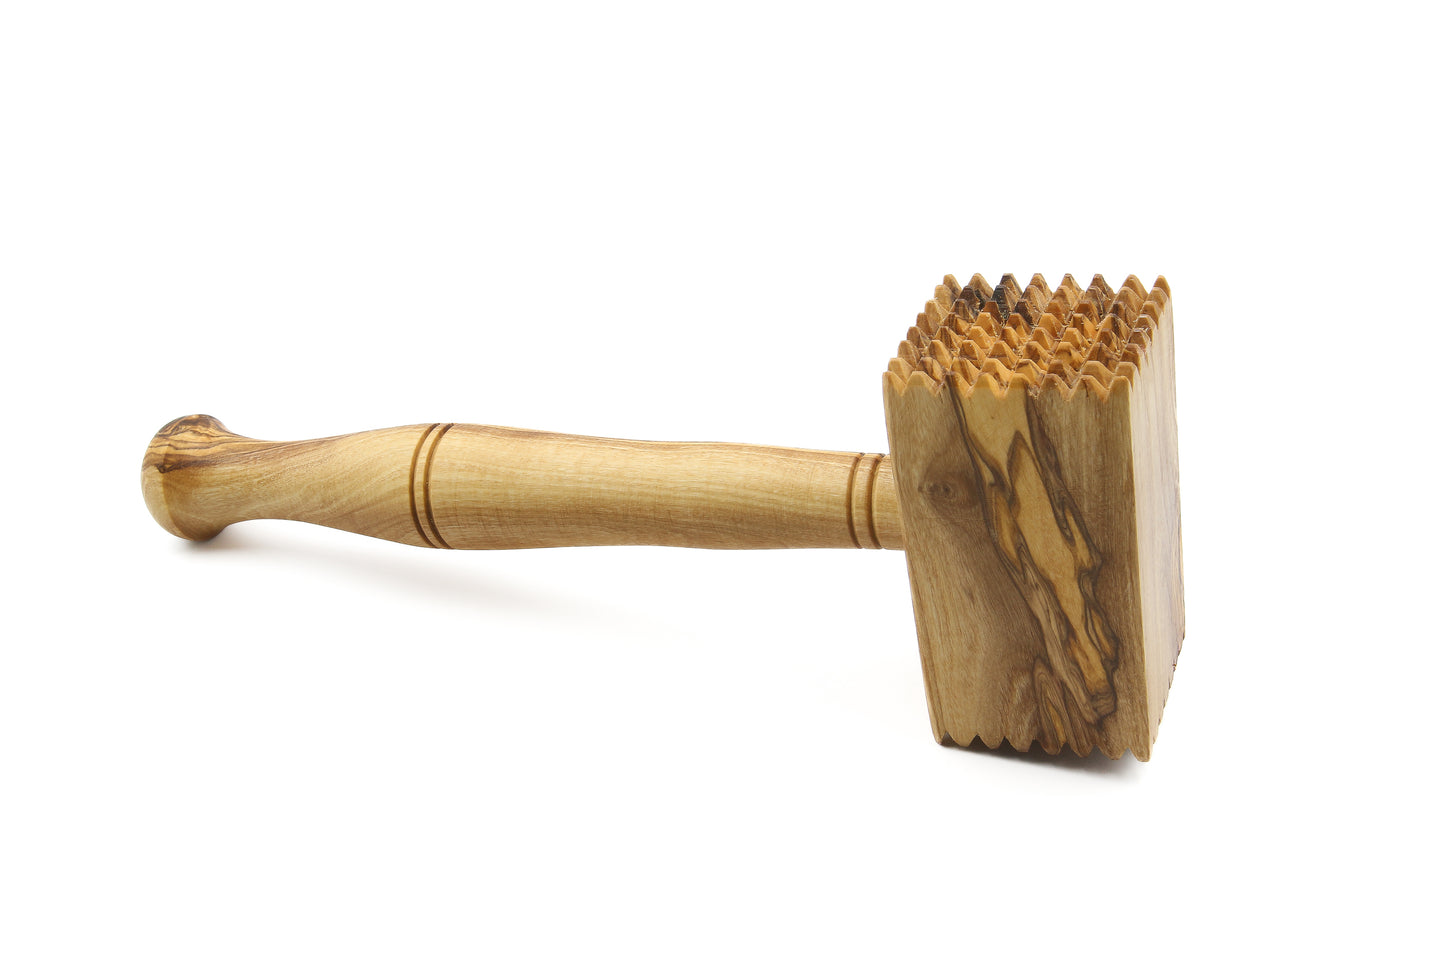 Olive wood mallet for tenderizing and flattening meat